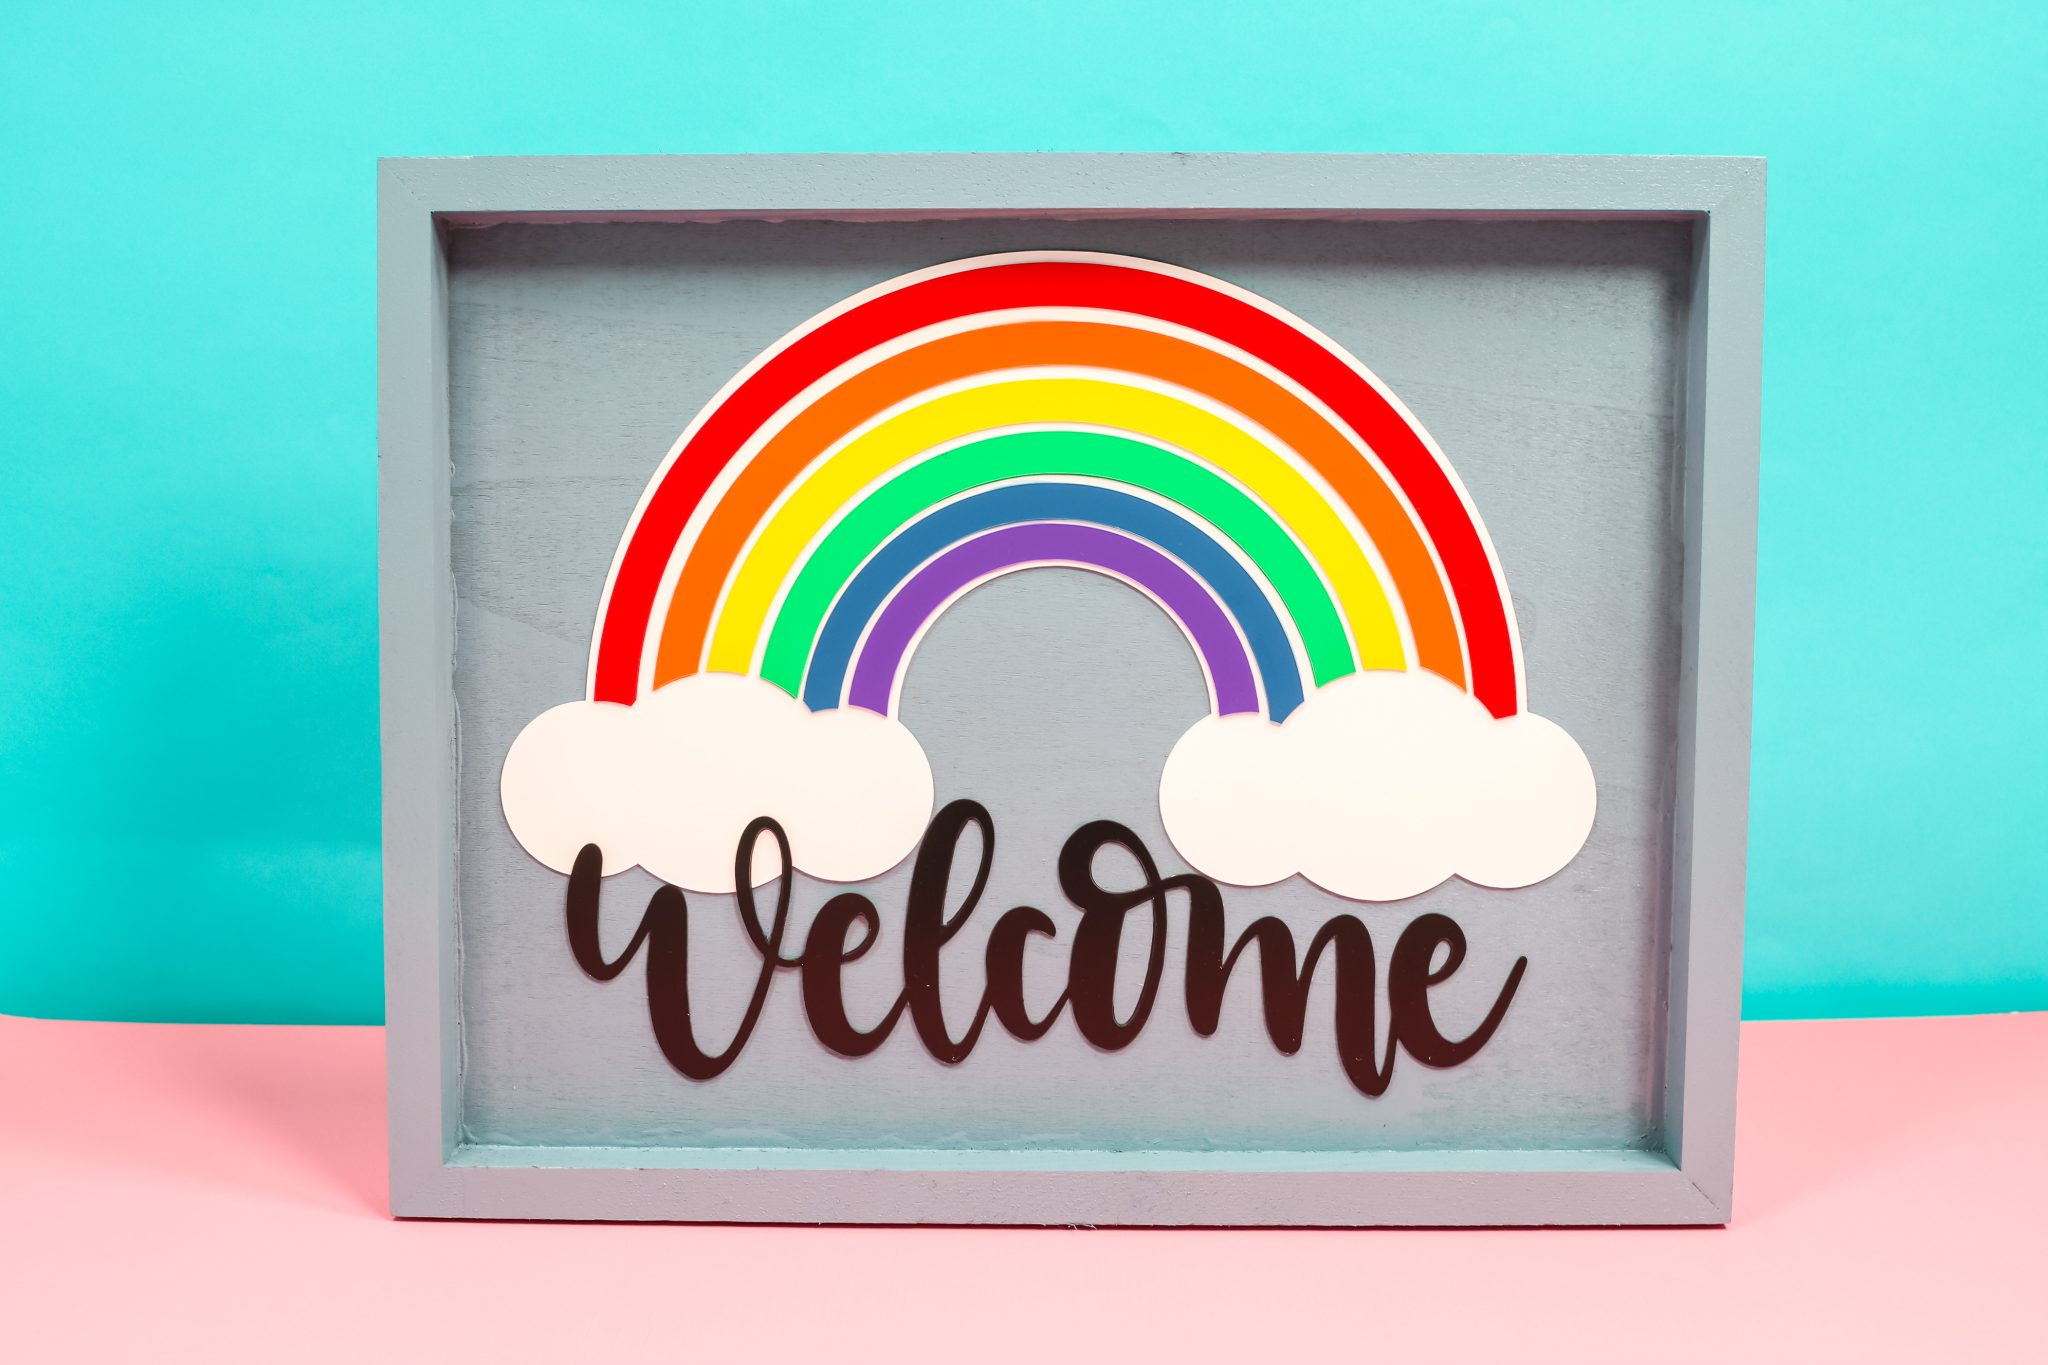 Welcome rainbow sign made with Cricut plastic.